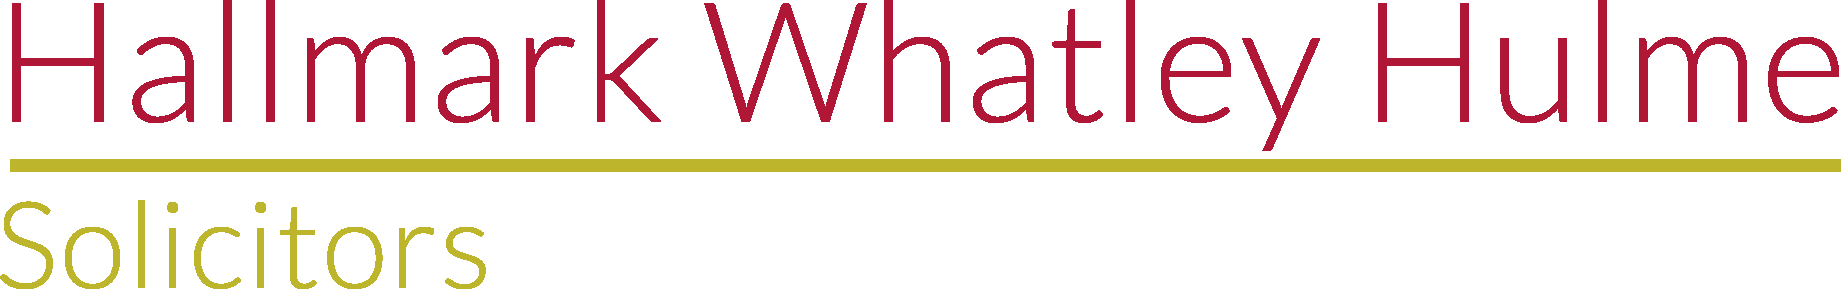 The Hallmark Whatley Hulme logo in red and green font.